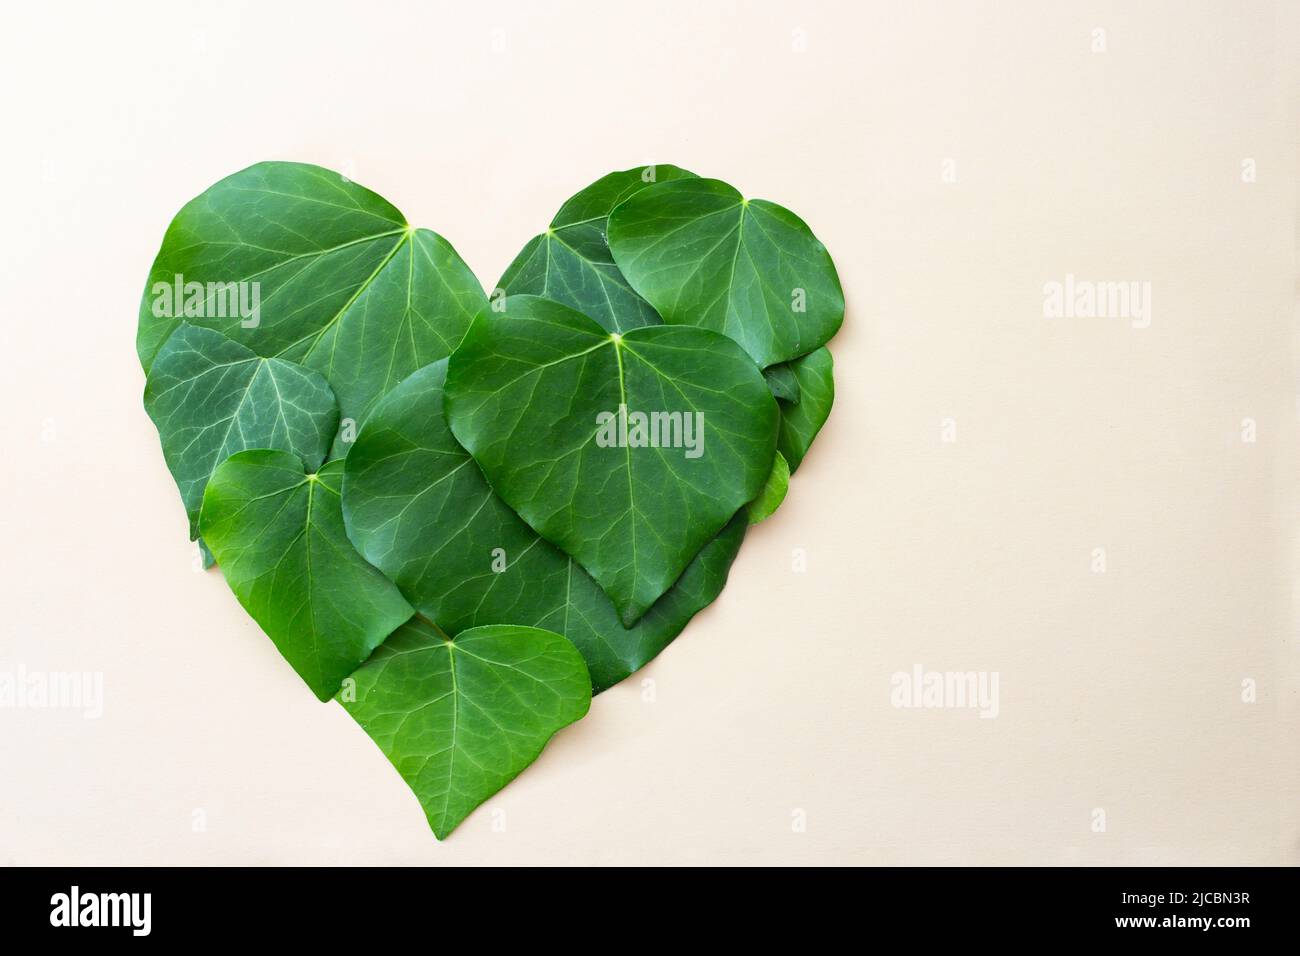 heart shape made of green leaves, isolated on beige background. Flat lay close up, natural mockup. Stock Photo